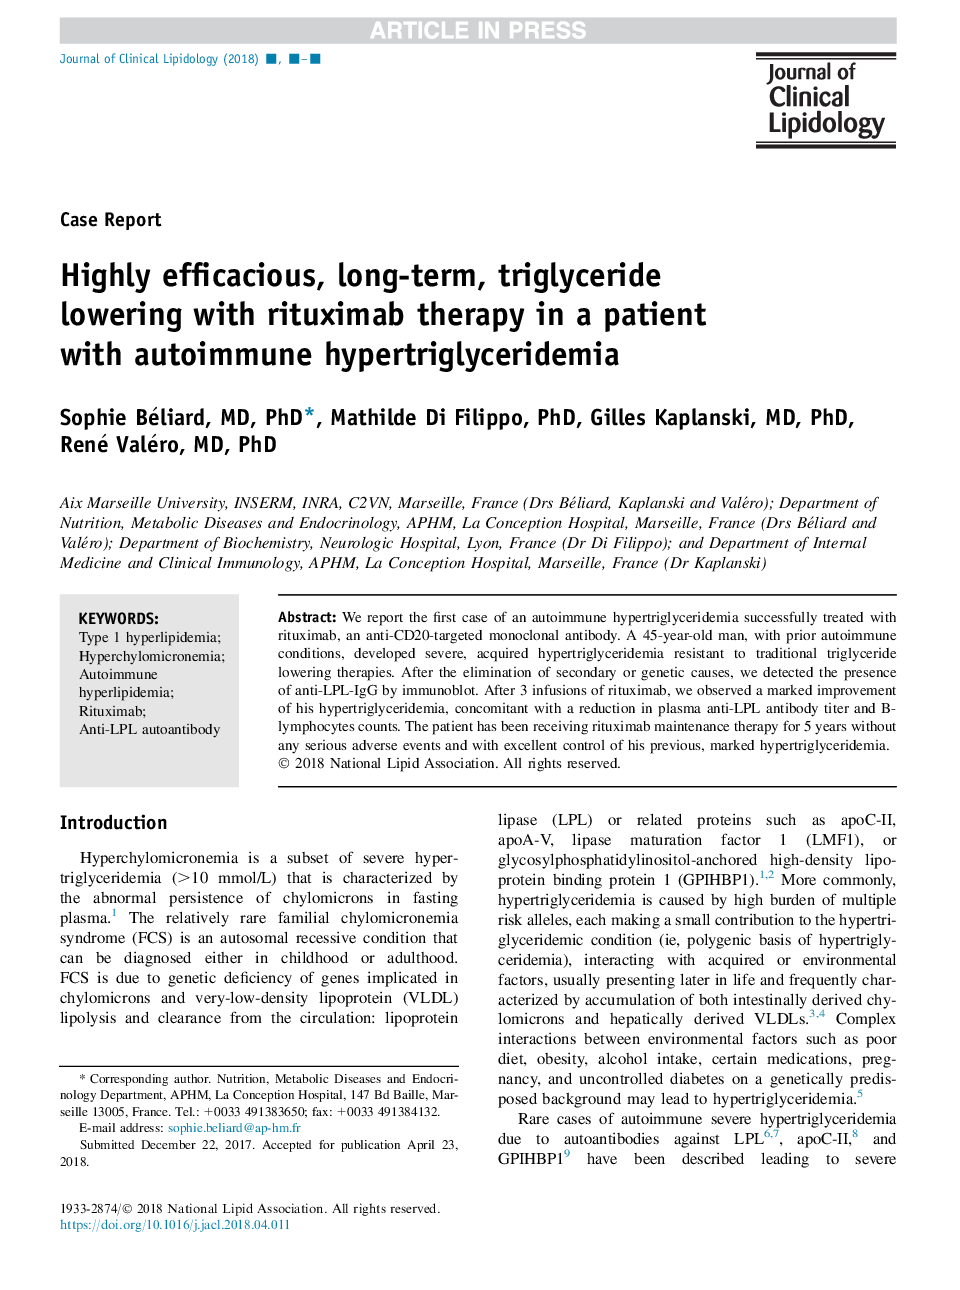 Highly efficacious, long-term, triglyceride lowering with rituximab therapy in a patient with autoimmune hypertriglyceridemia